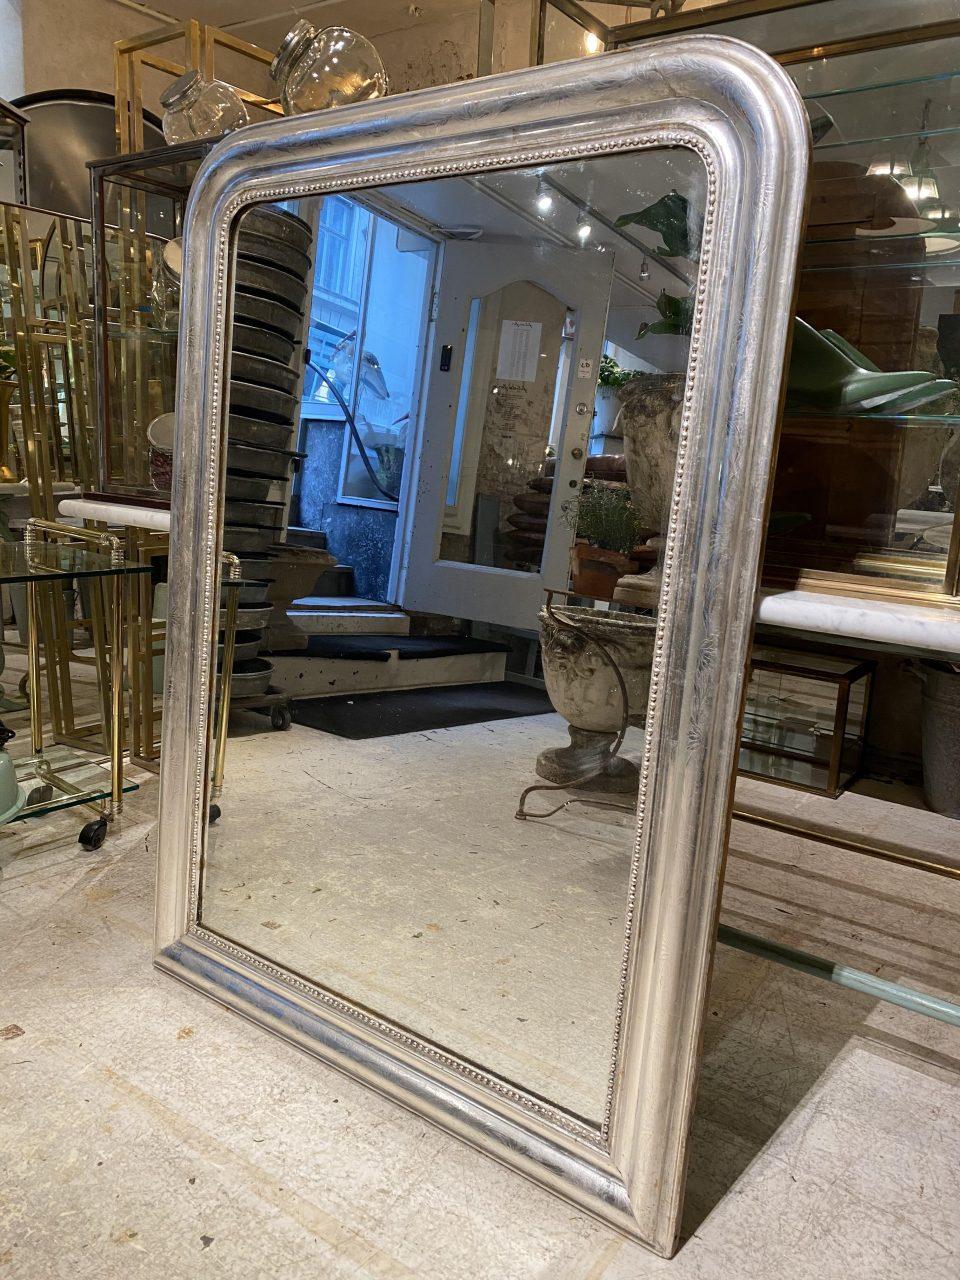 Beautiful and rare antique French Louis Phillipe silver mirror from the 1860s. Louis Phillipe mirrors are characterized by their curvaceous wide frames with rounded corners and wonderfully elegant profiles. Often used on mantlepieces.

This piece